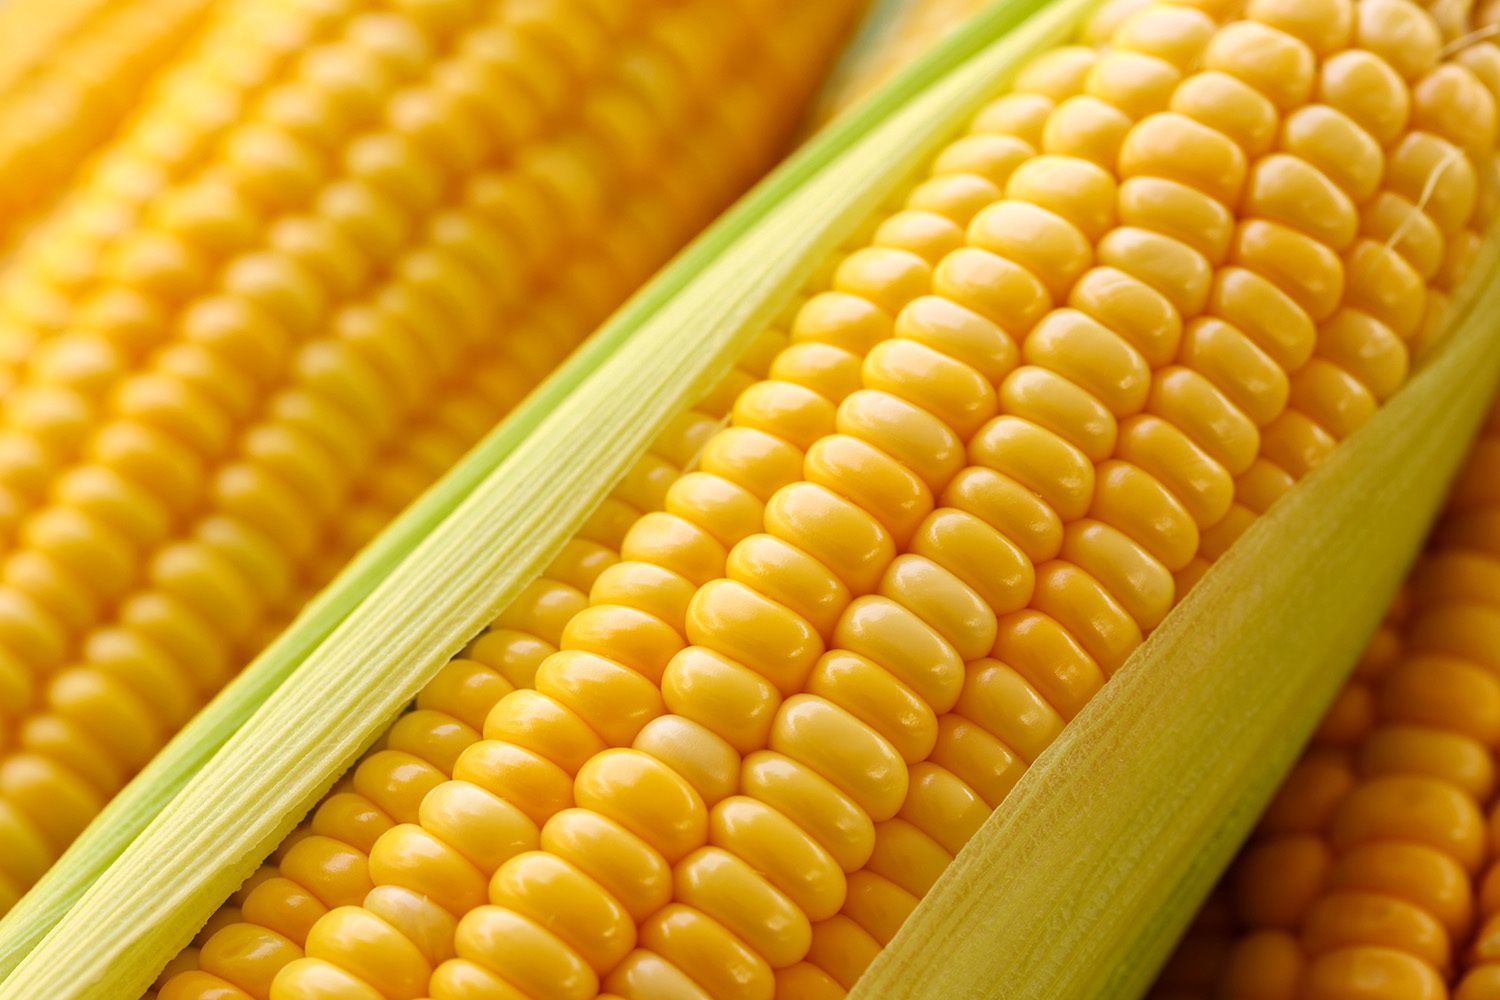 What’s Science Saying About Corn?